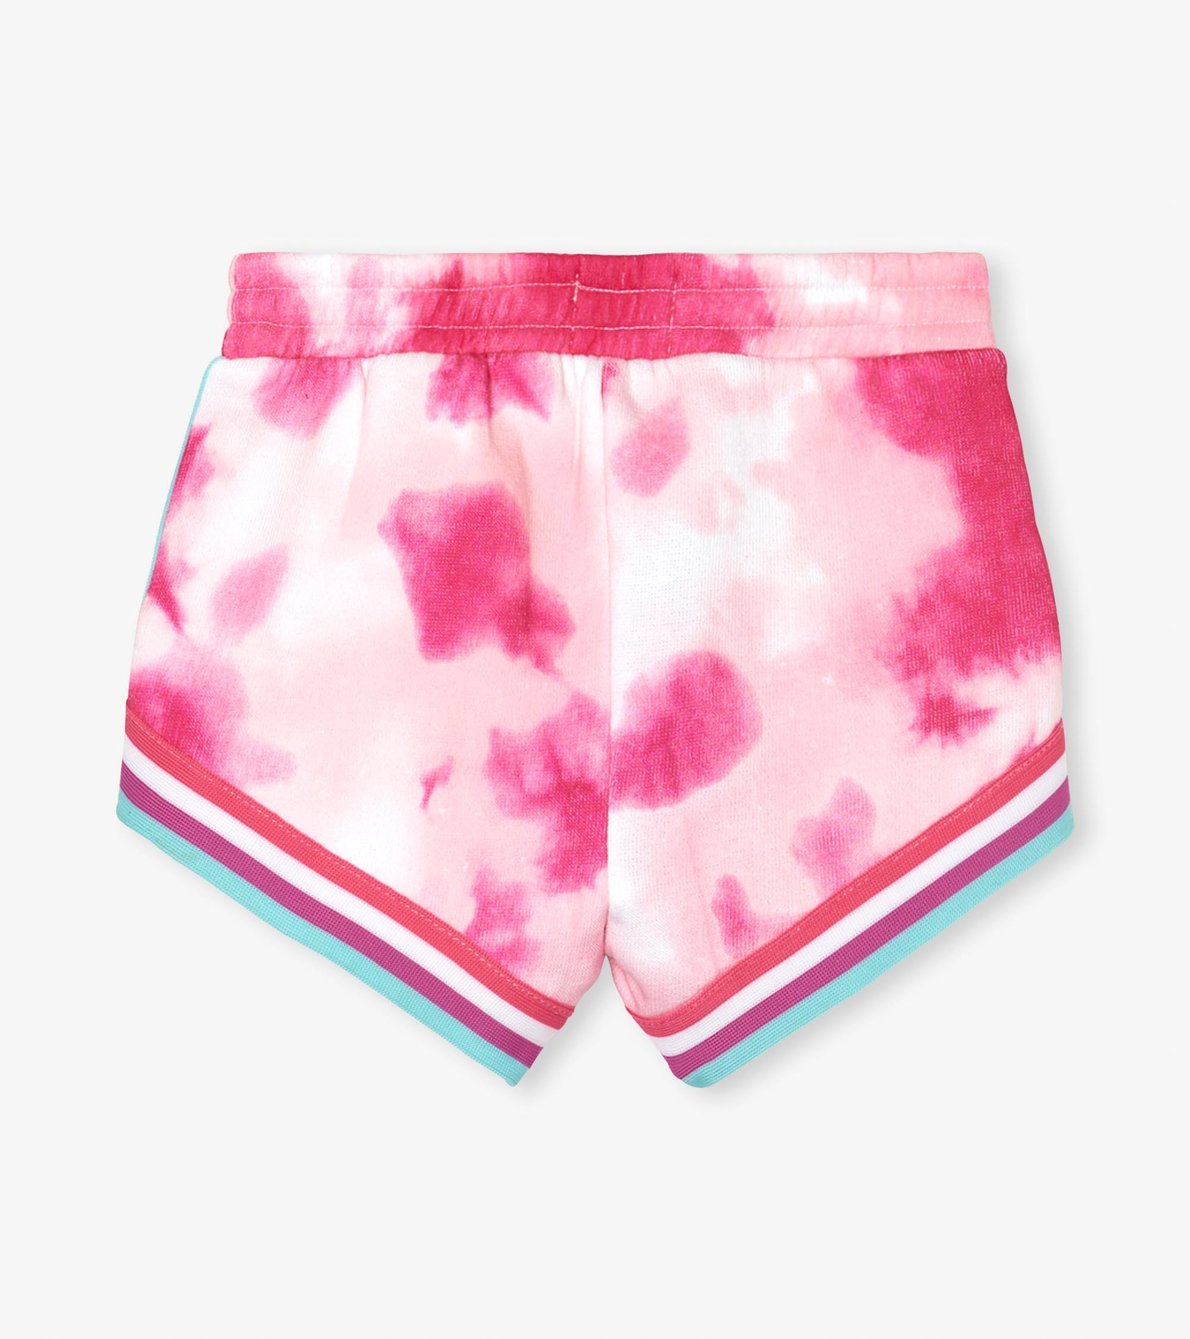 View larger image of Pink French Terry Jogging Shorts